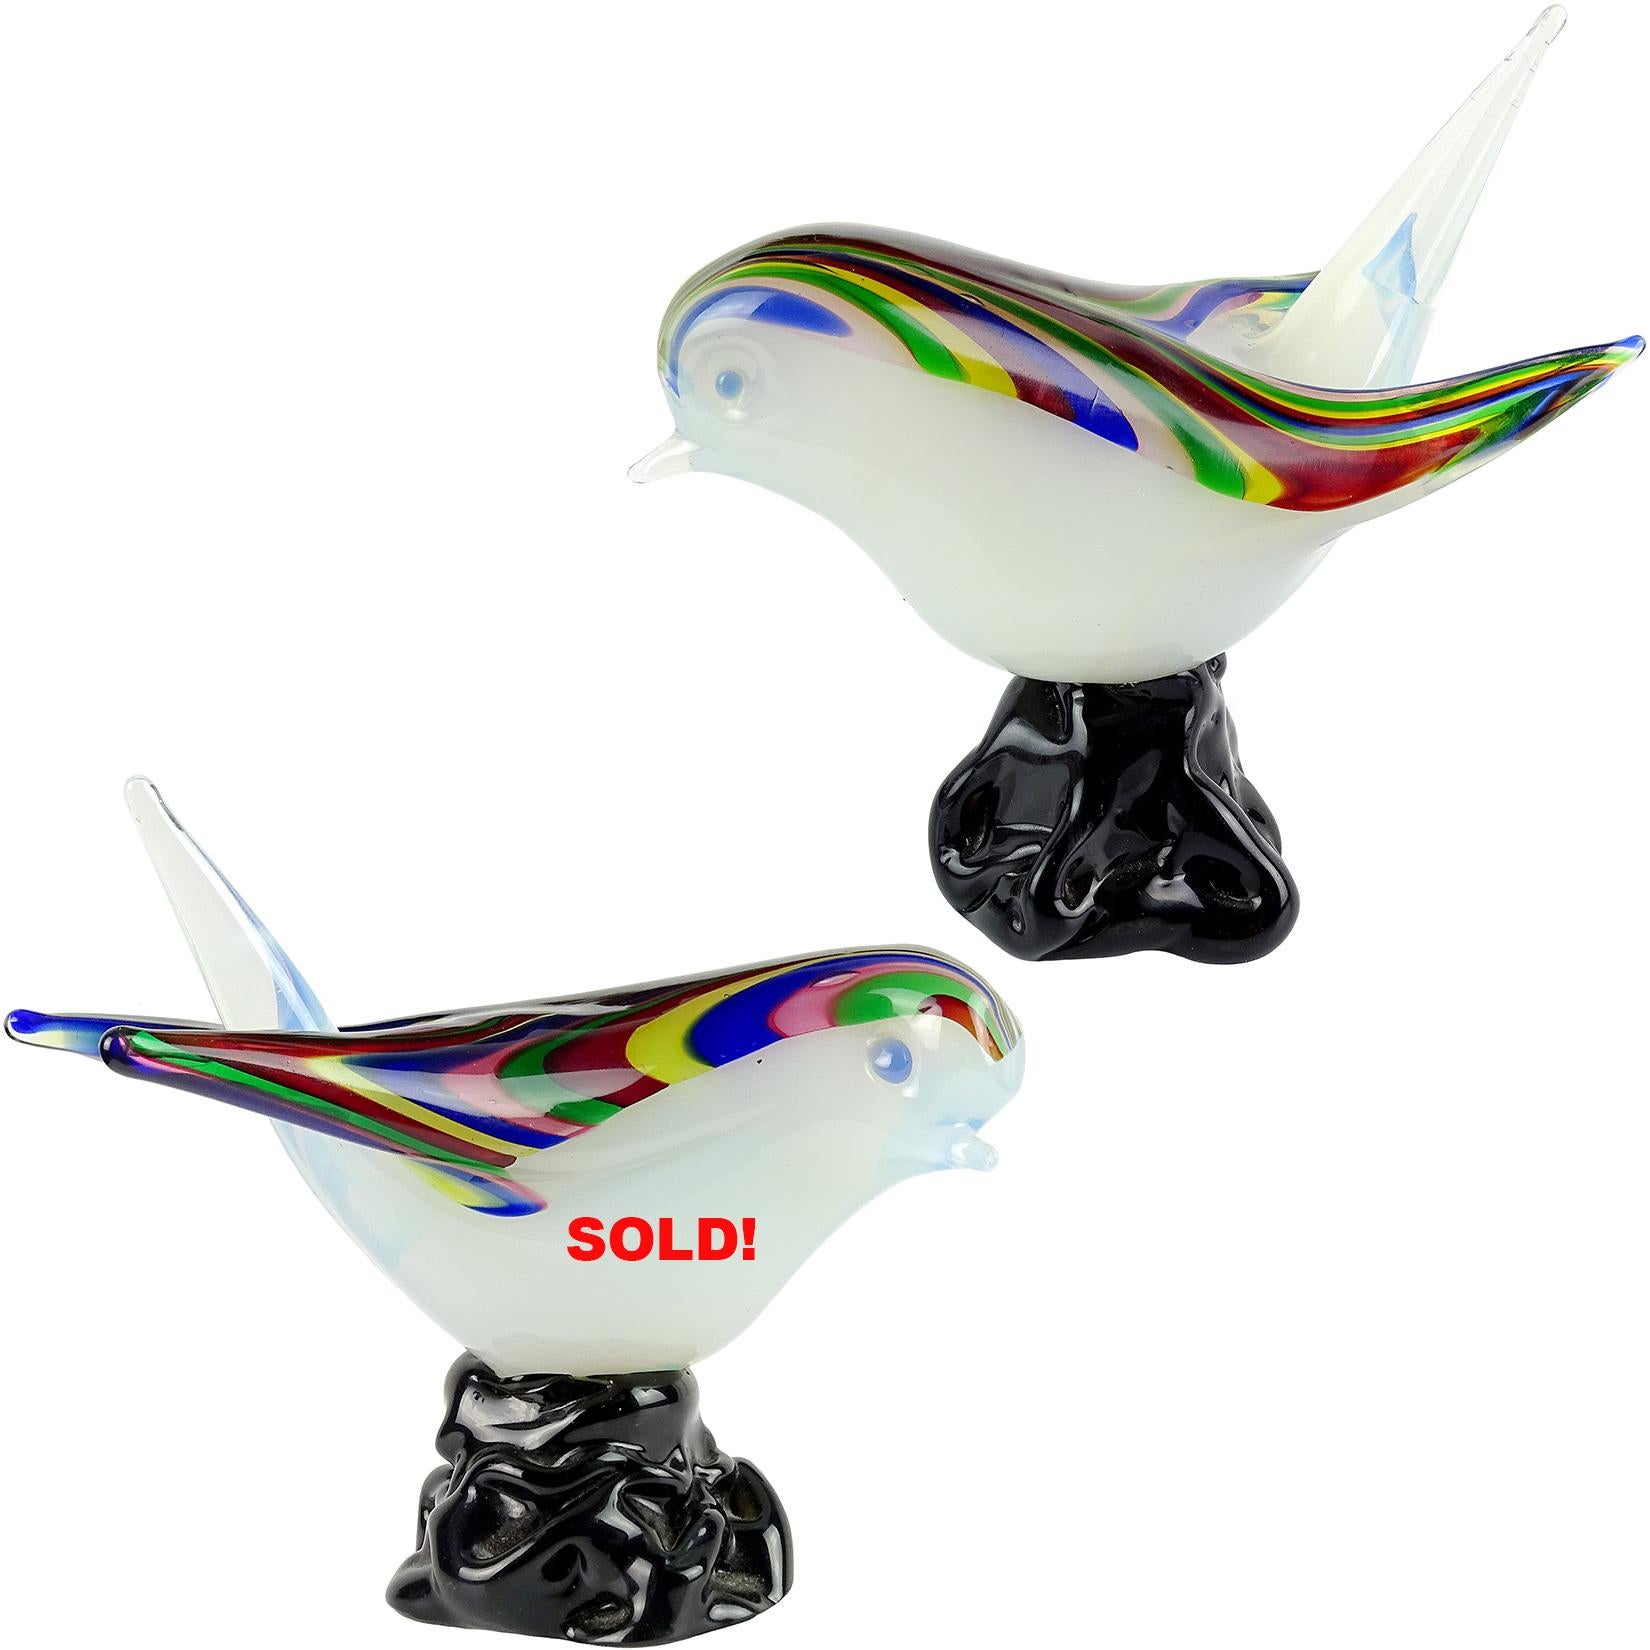 Only 1 Left - Beautiful Murano hand blown, opalescent white, with rainbow color feathers Italian art glass bird figurines / sculptures. Documented to designer Archimede Seguso. They Stand on black rock form bases. Very unusual design and color